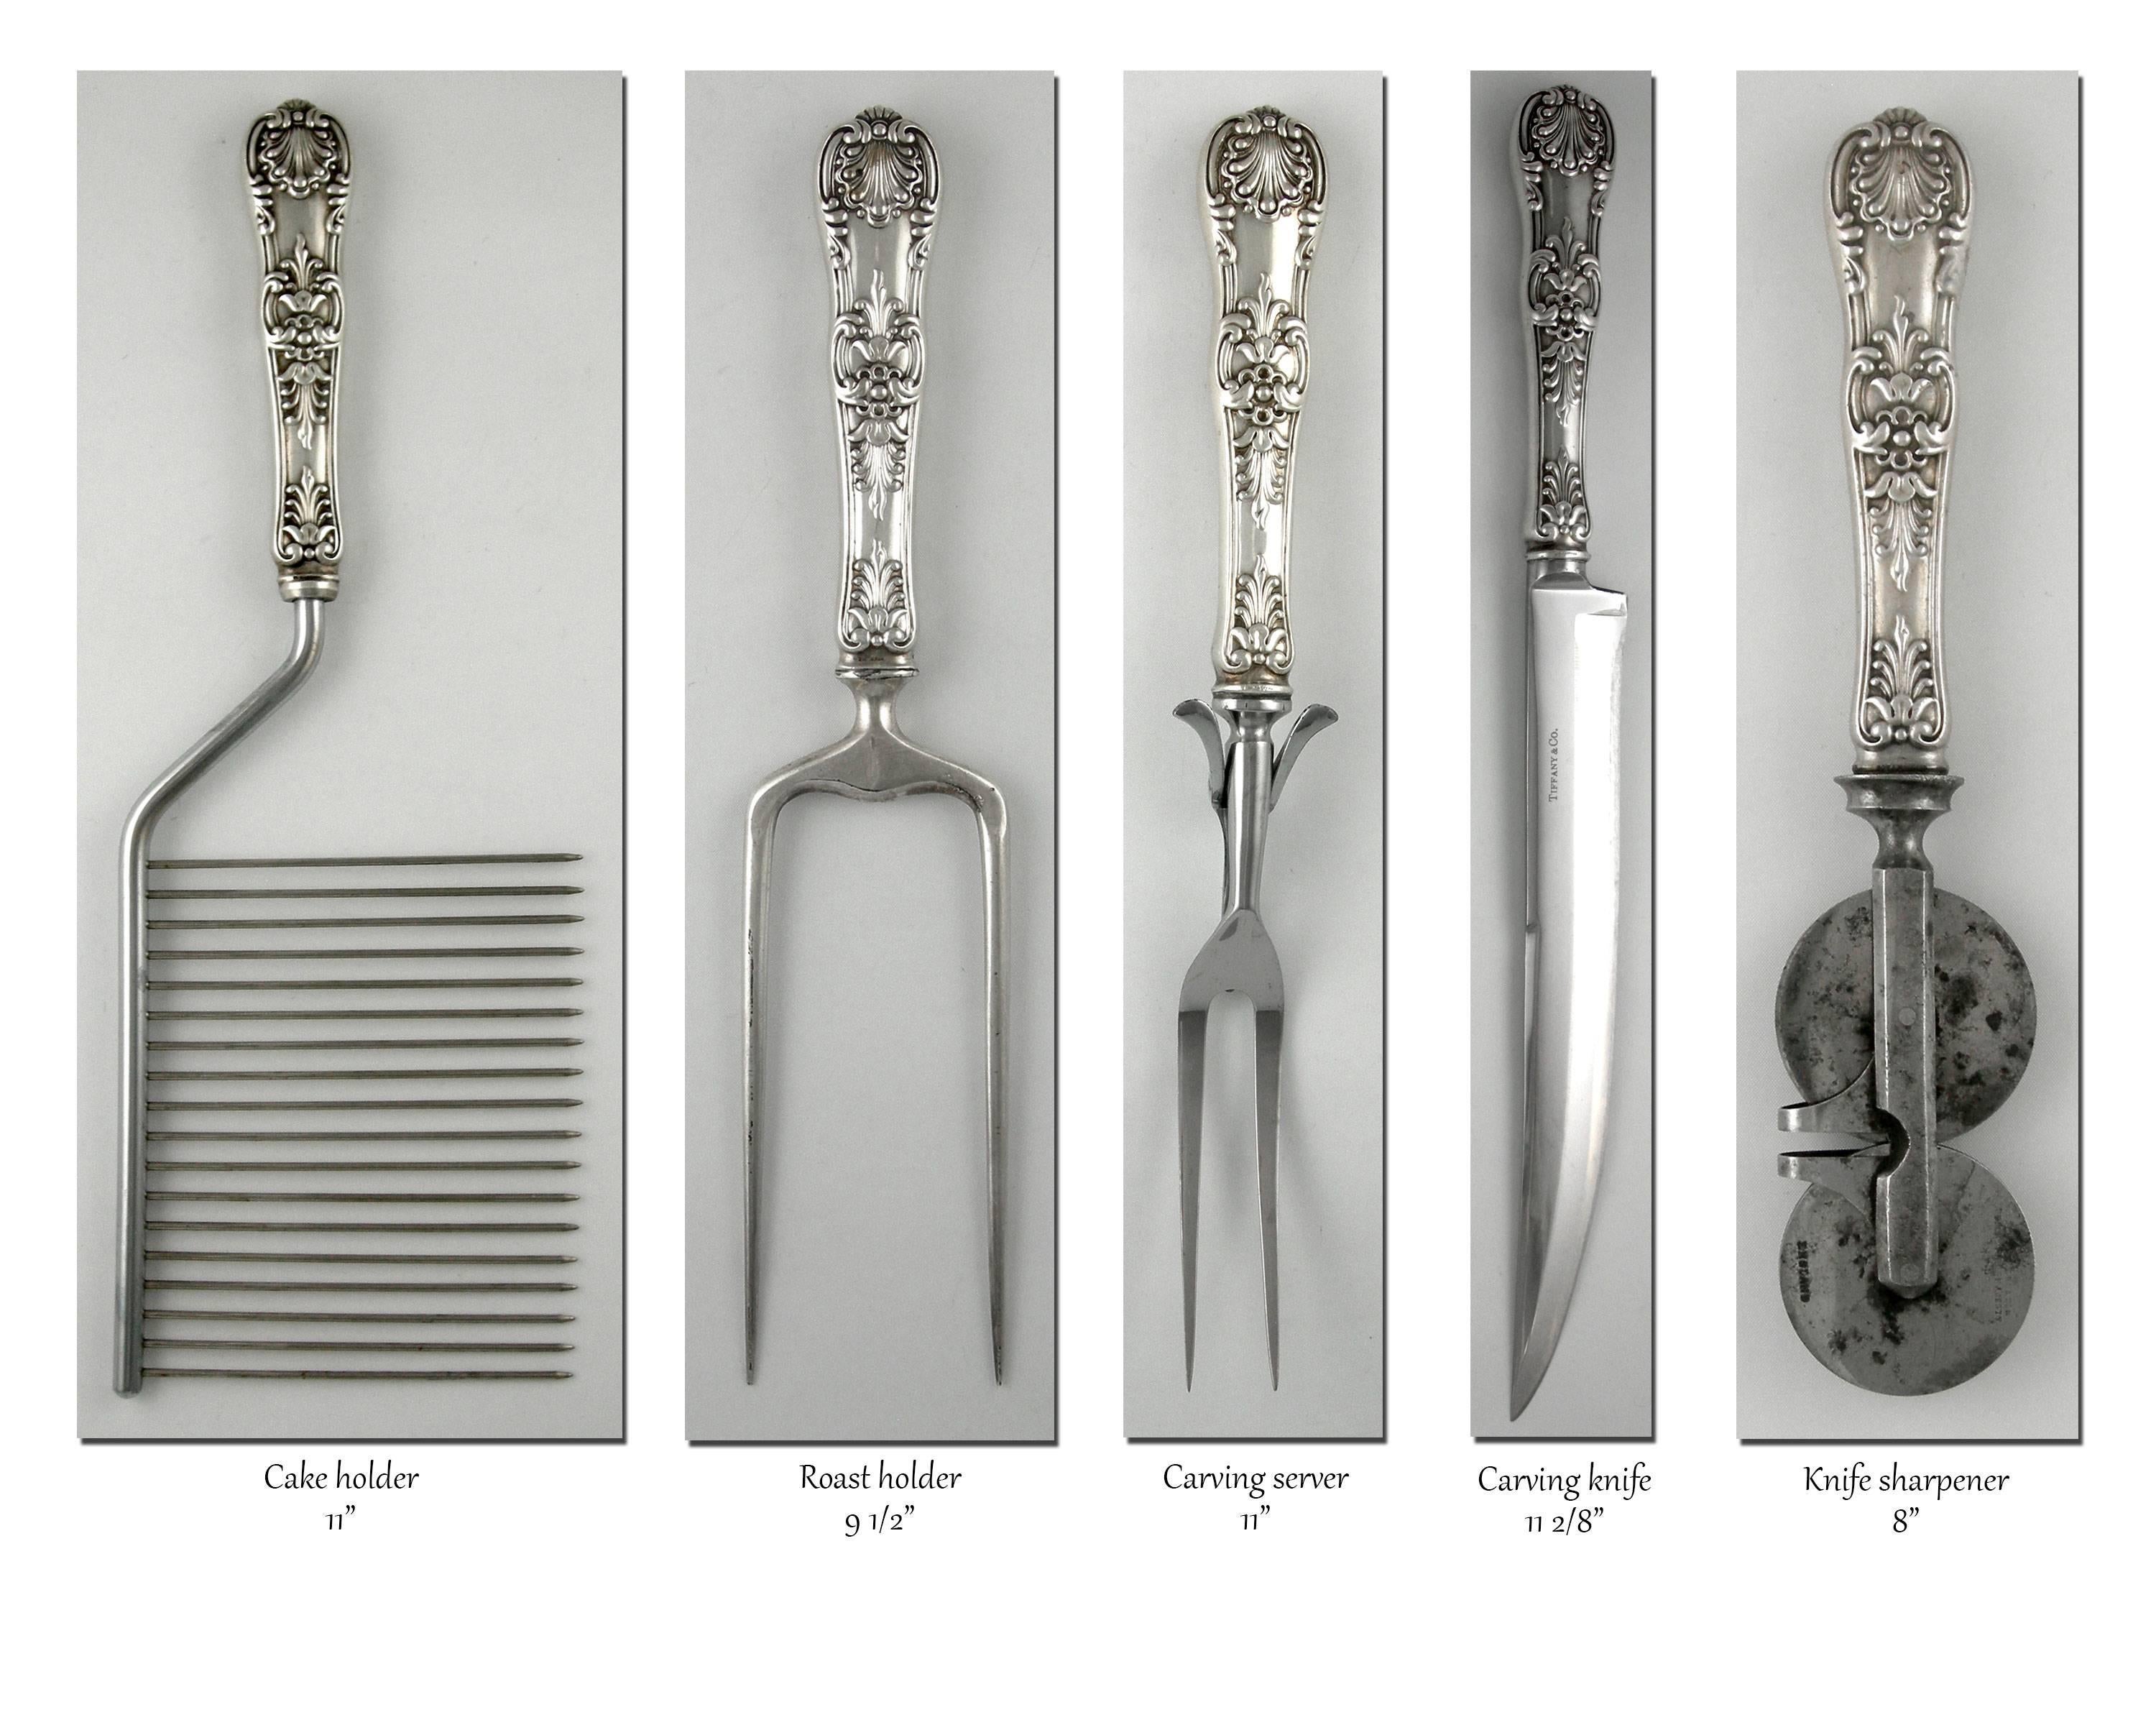 Tiffany English King 246 Piece Sterling Flatware Set, 1875-1891 In Excellent Condition For Sale In Bridport, CT